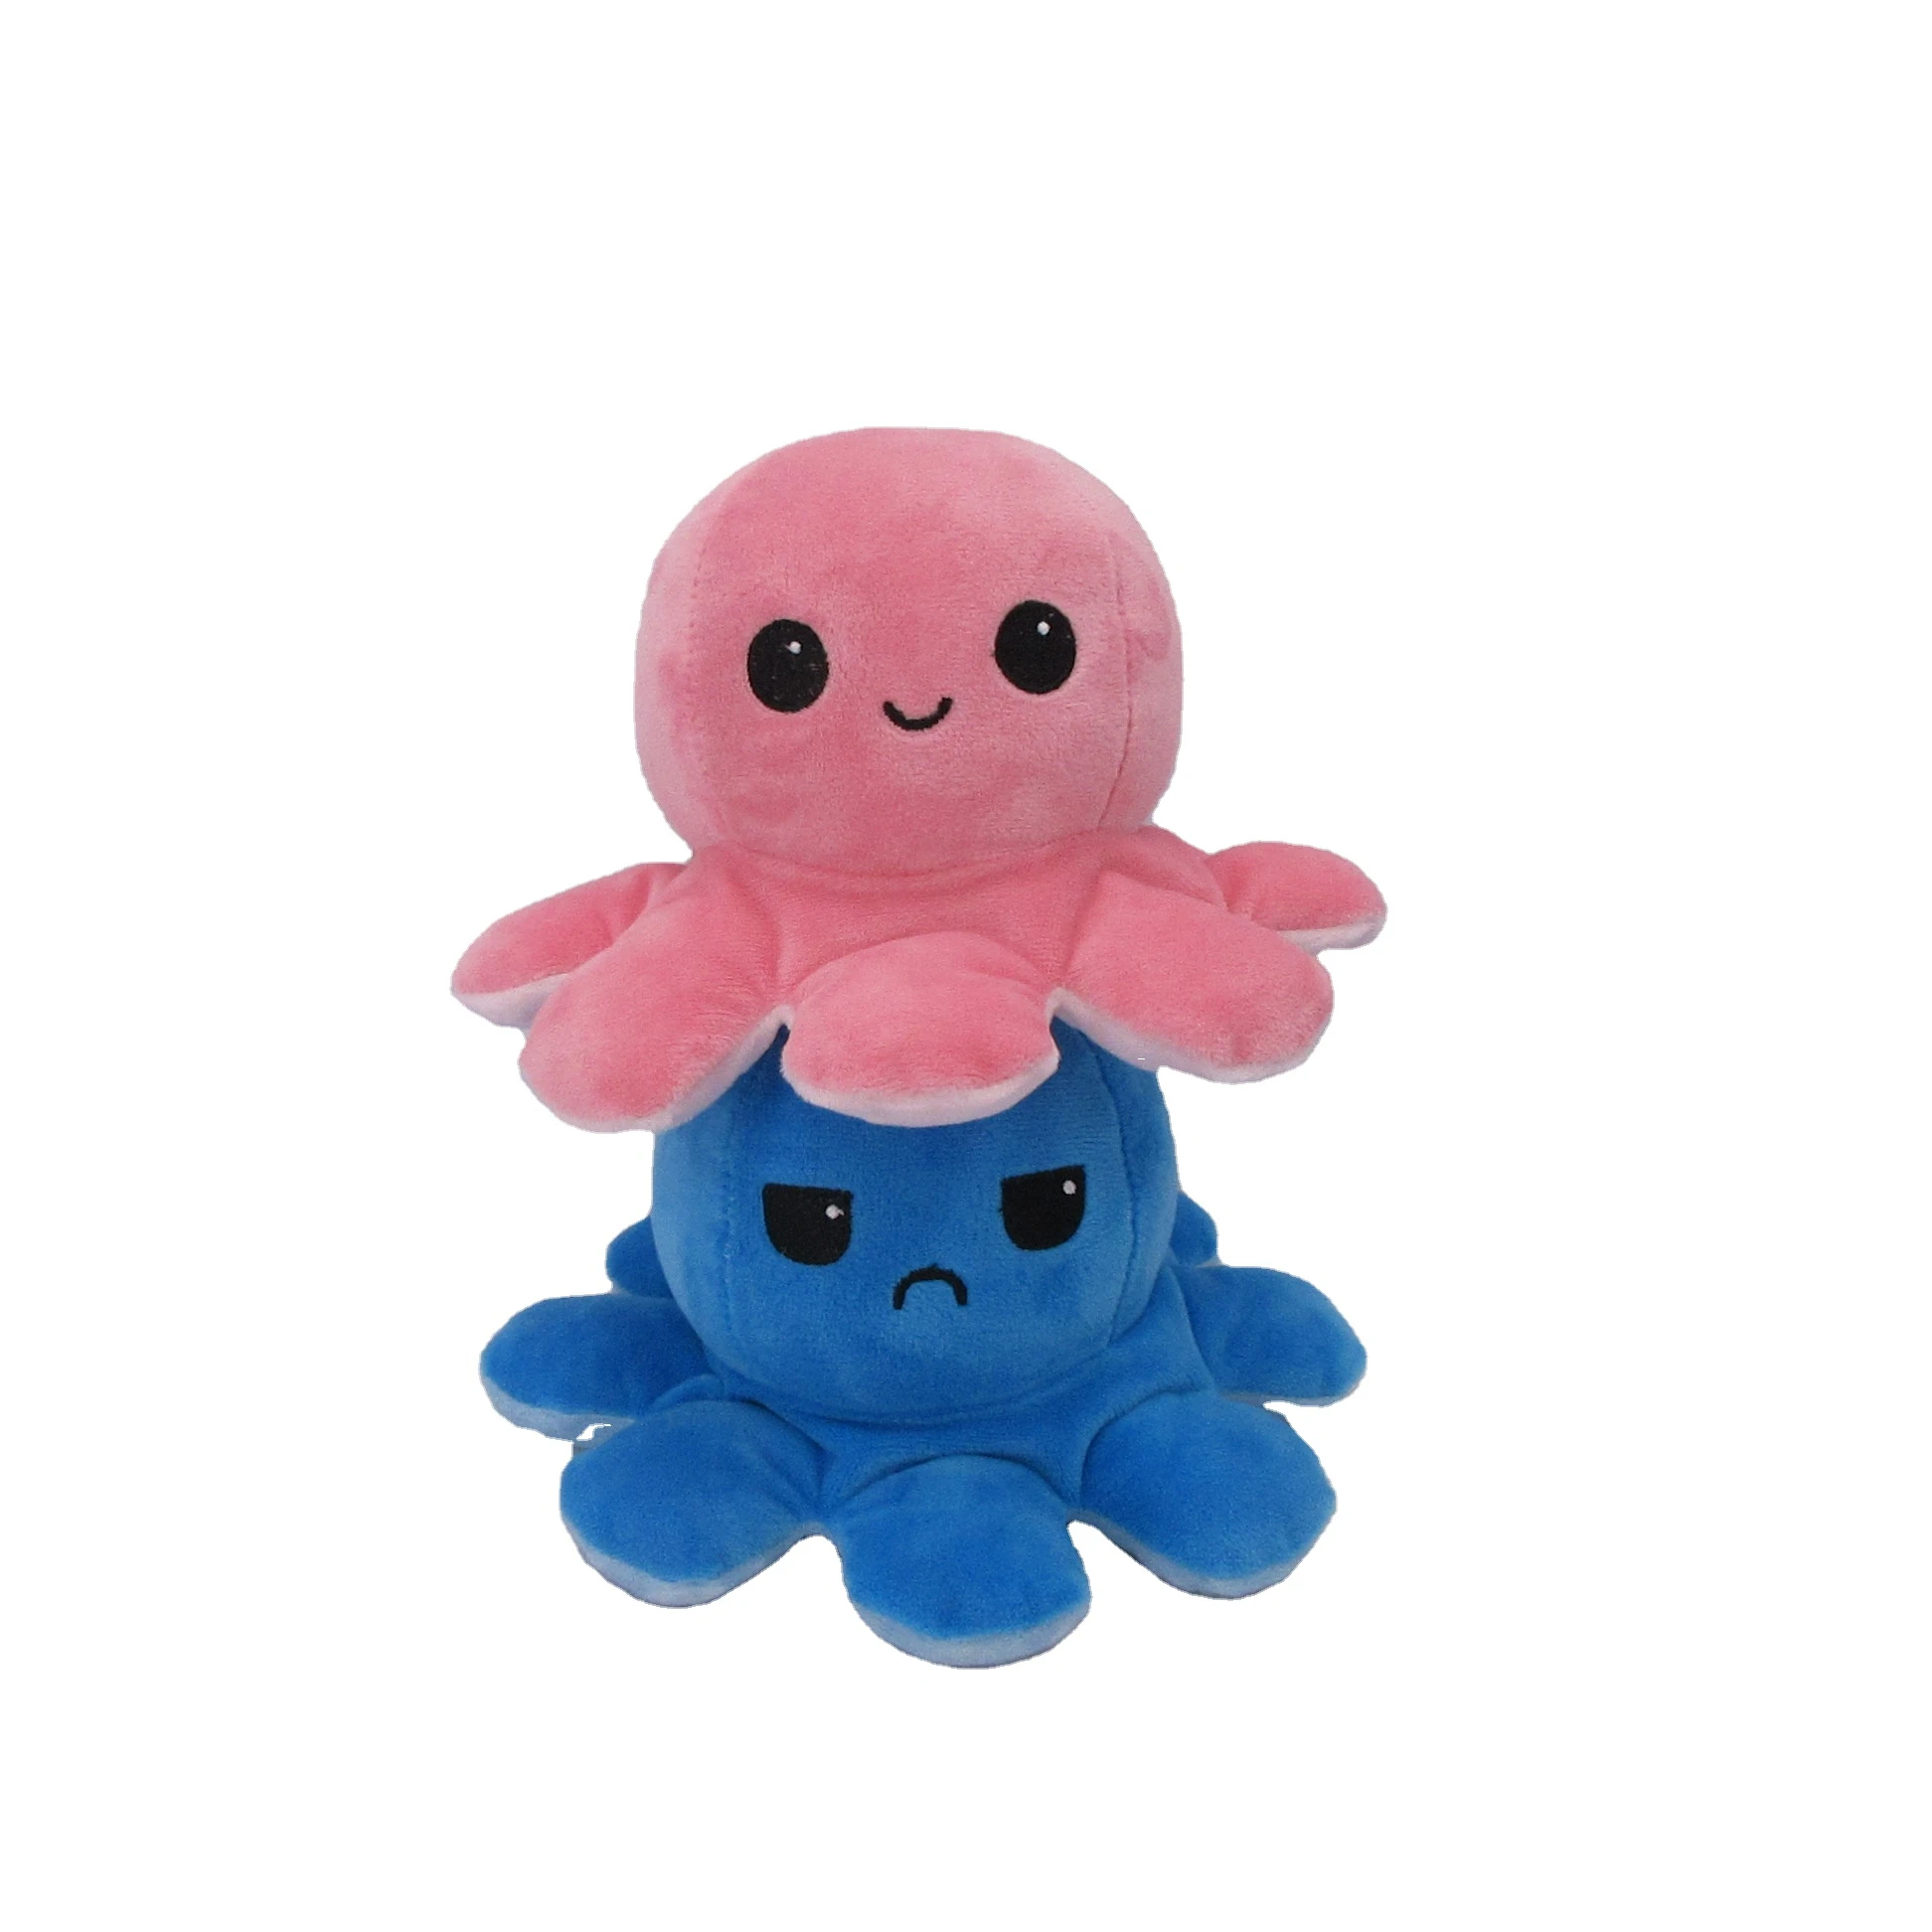 Cute doble sided Reversible Flip stuffed toy octopus animal expression plush toys gifts